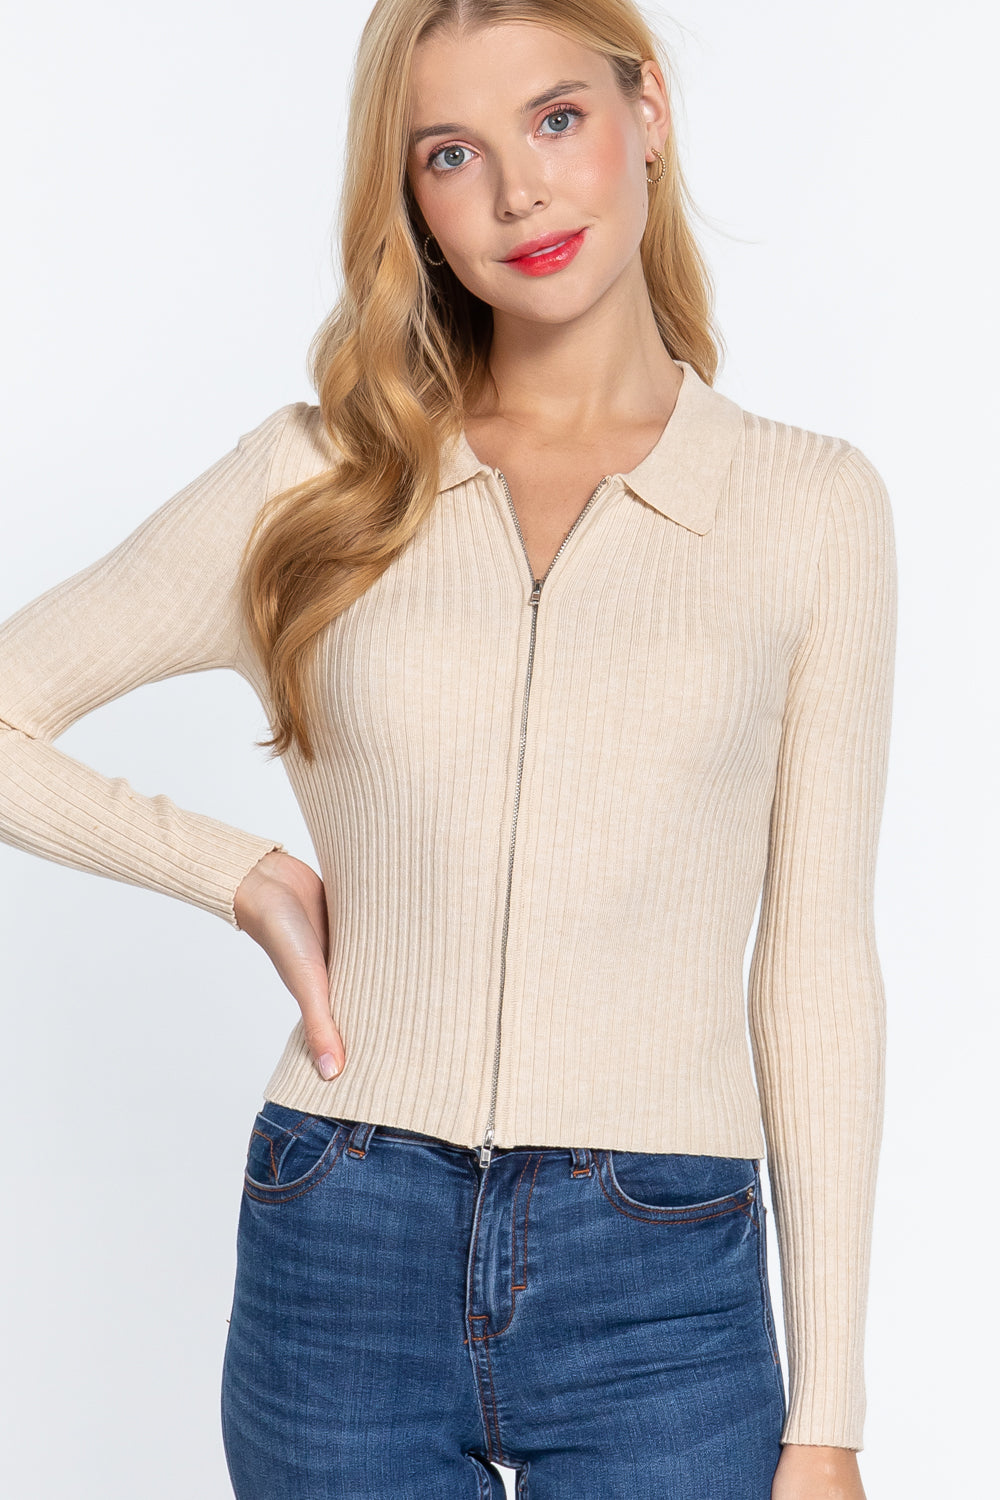 Cream Beige Notched Collar Front Zip Long Sleeve Slim Fit Stretchy Knit Sweater Top_ Shirts & Tops jehouze 